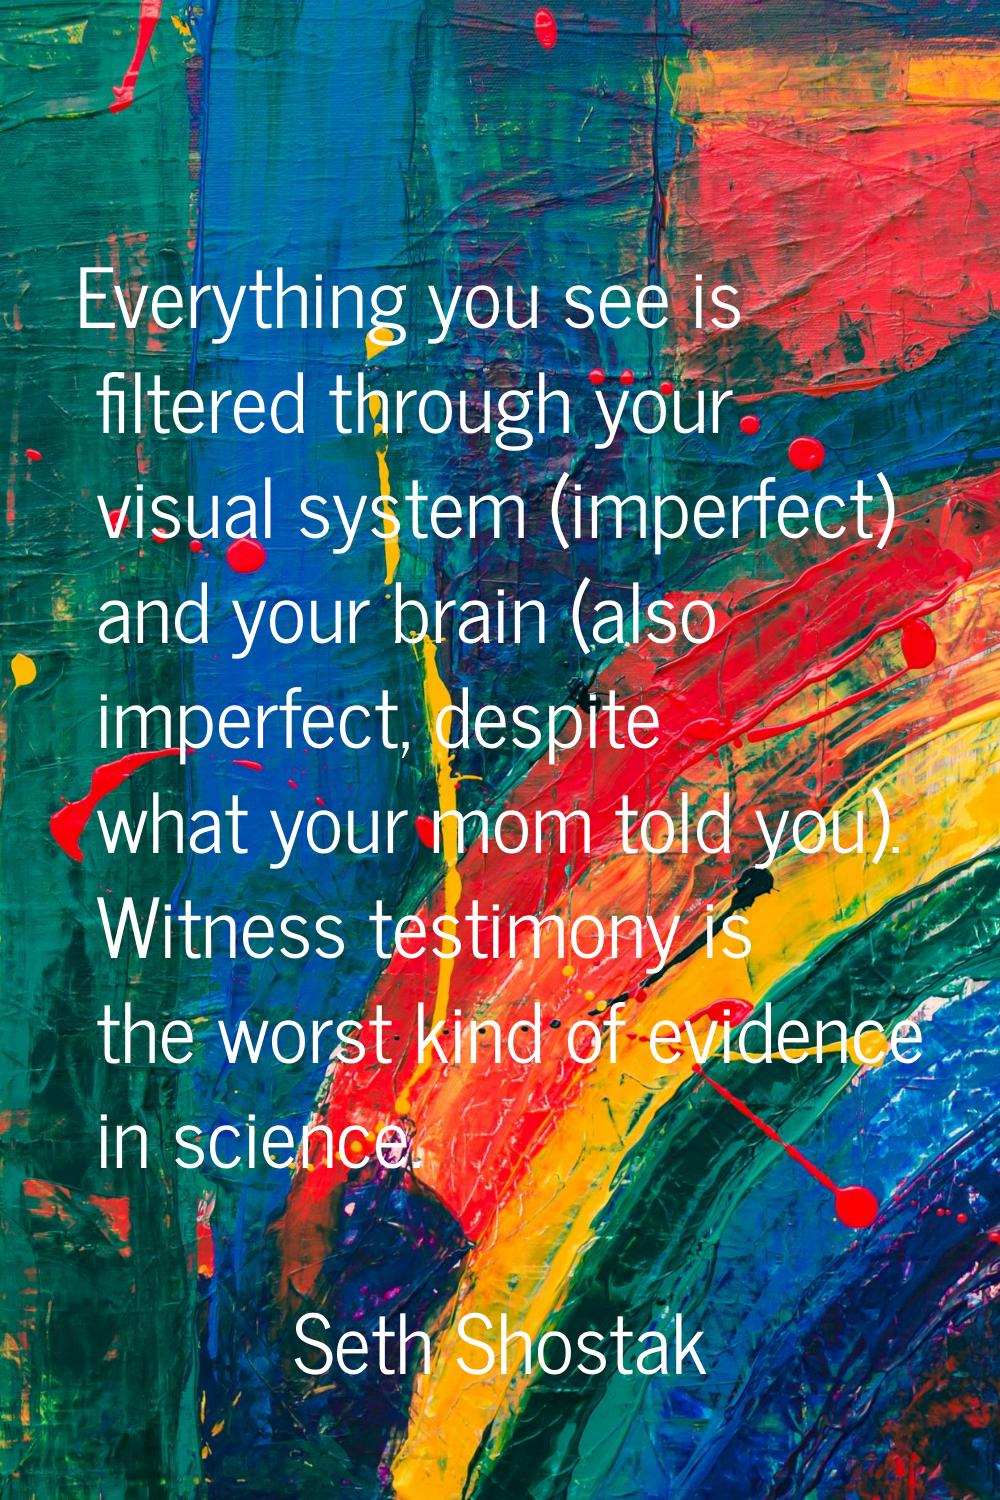 Everything you see is filtered through your visual system (imperfect) and your brain (also imperfec